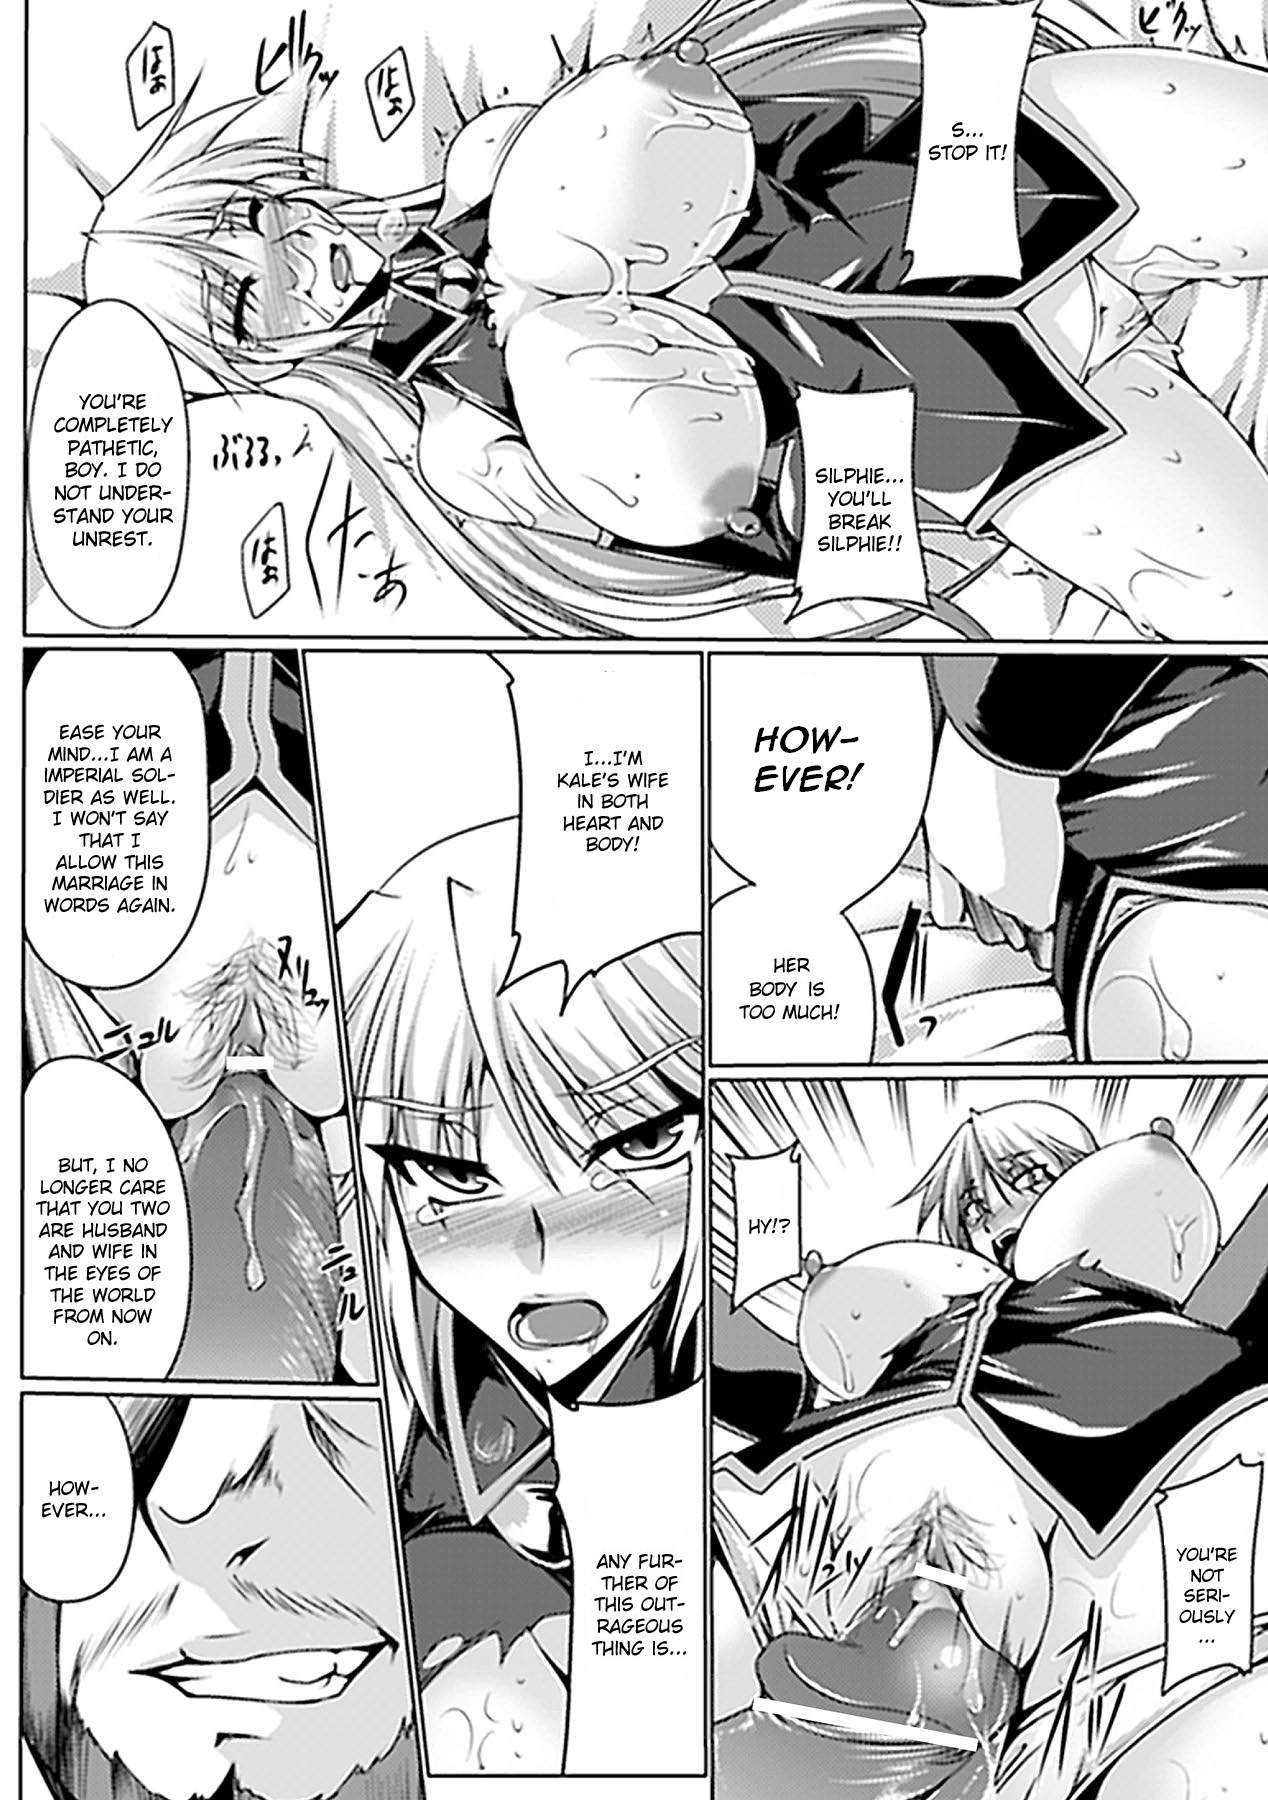 Stolen Military Princess [English] [Rewrite] page 7 full